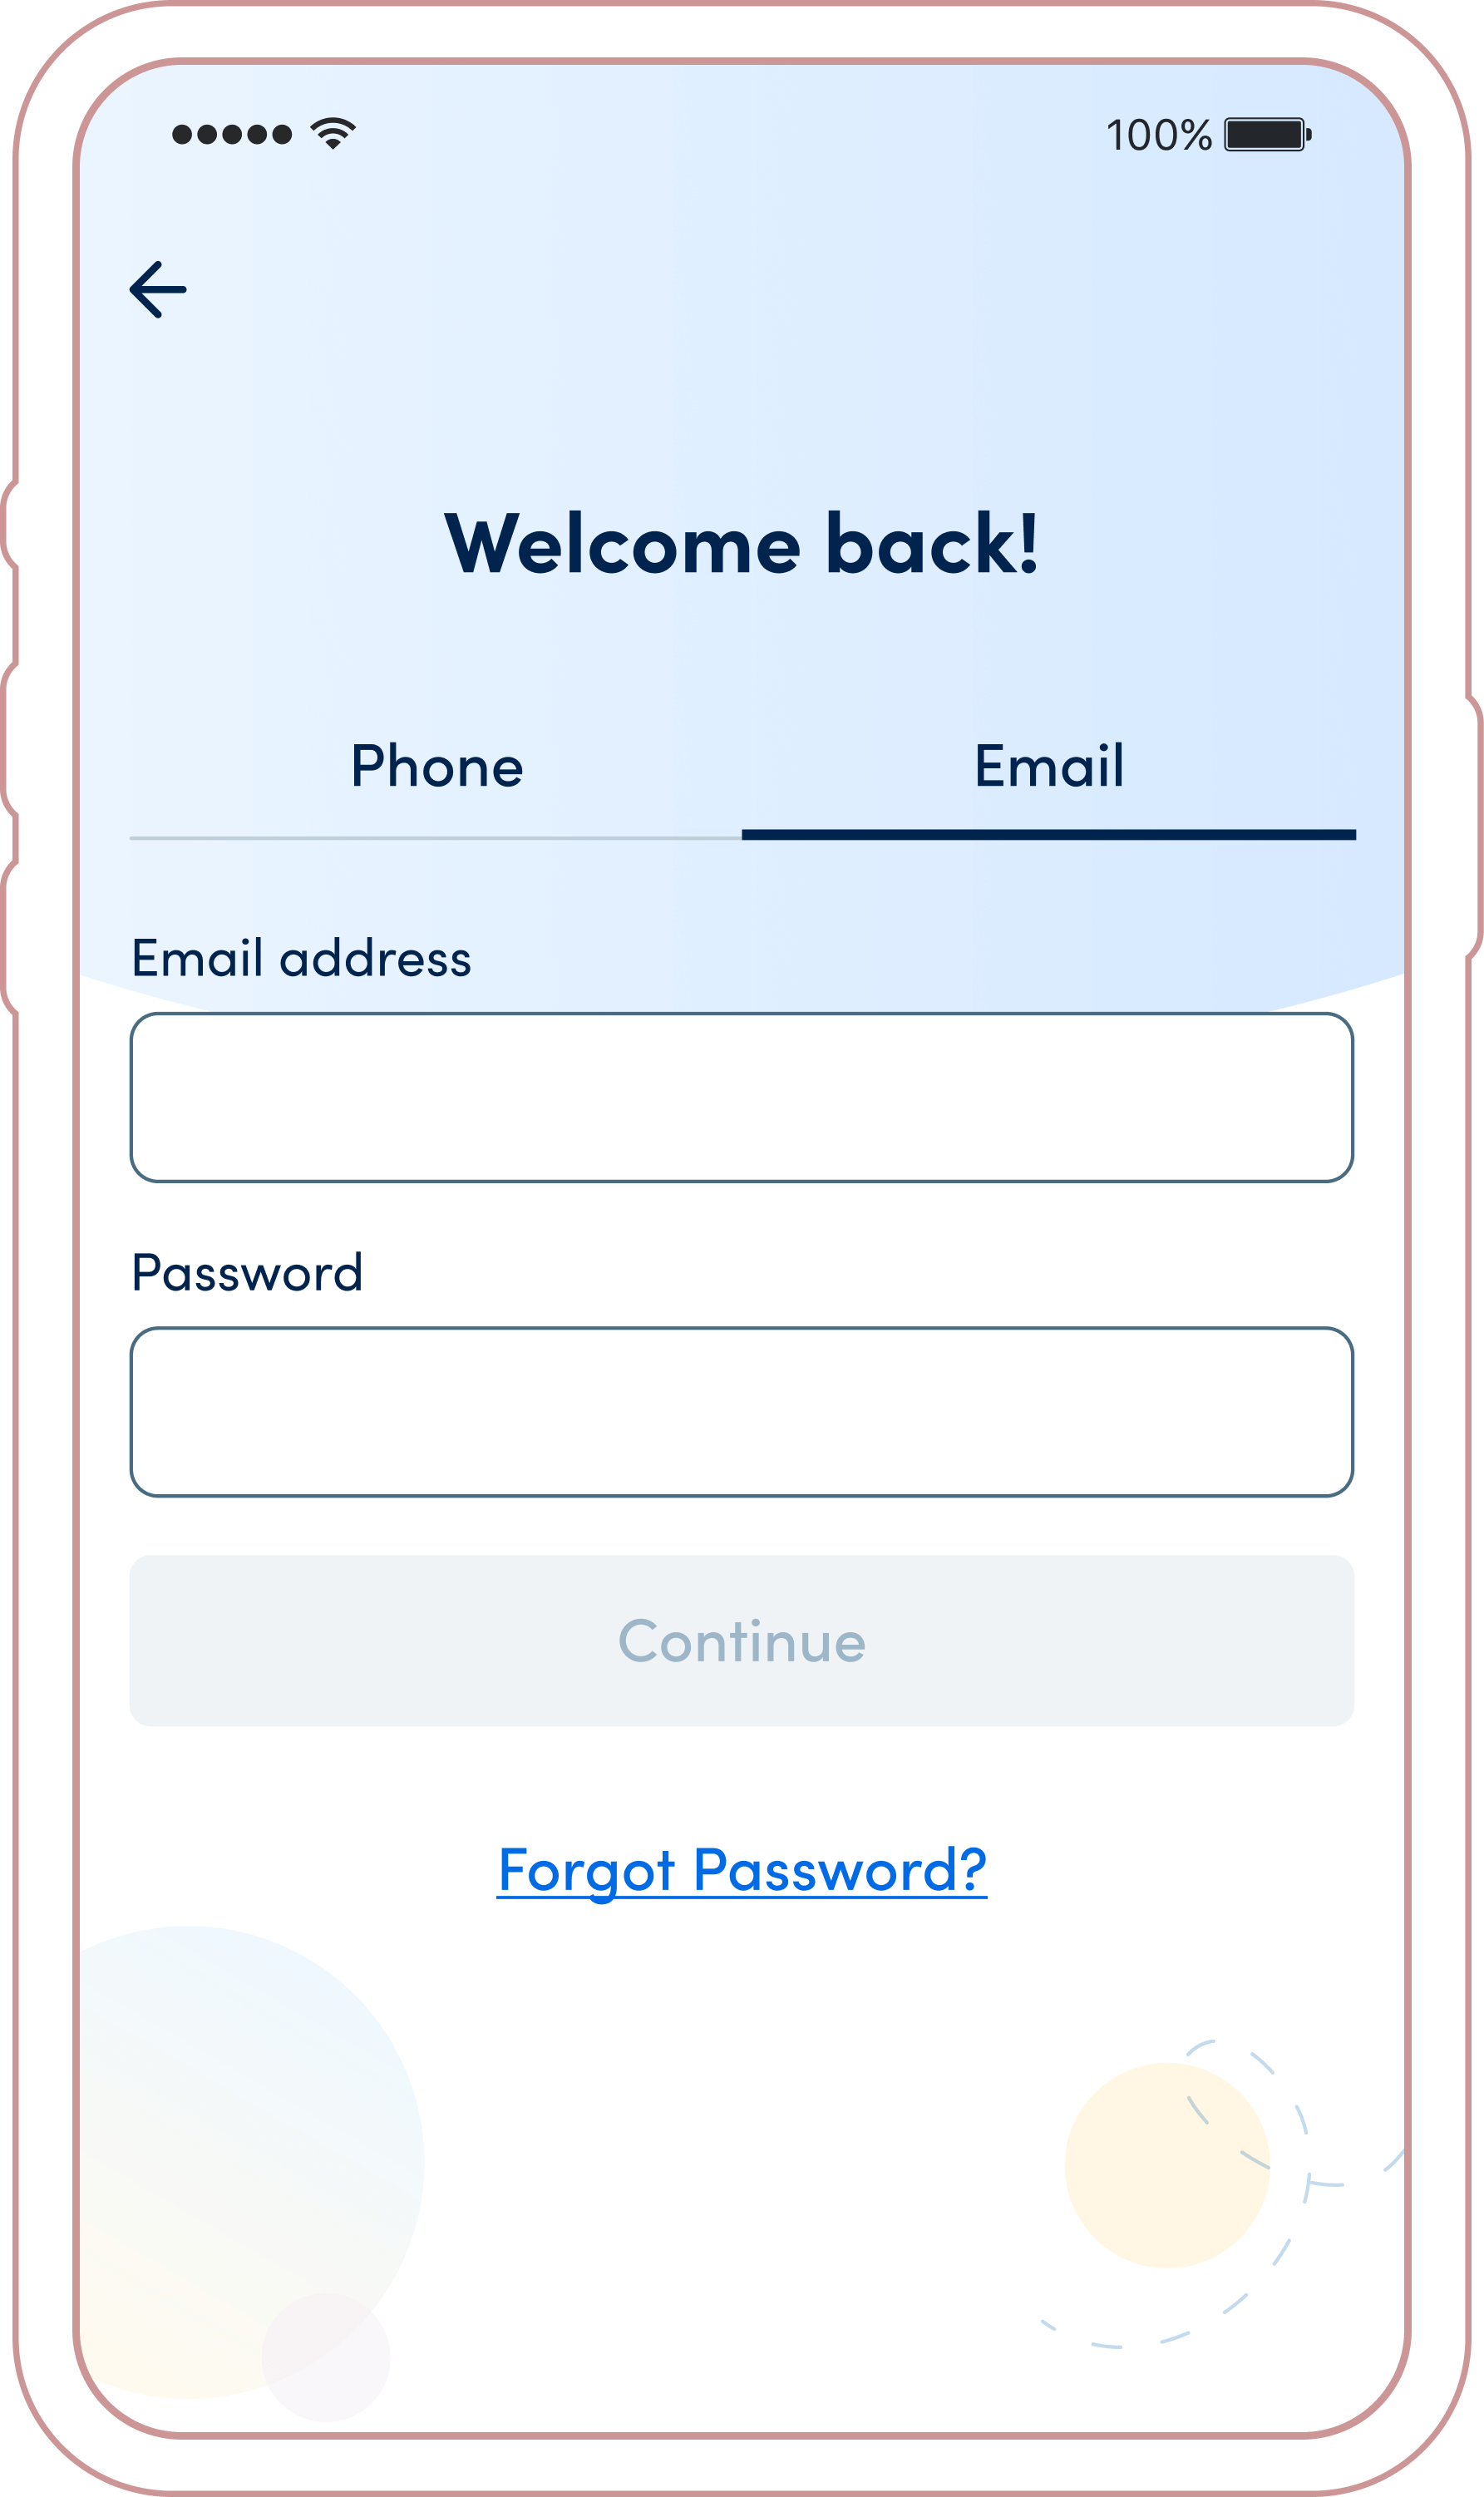 Email Sign In screen for returning users in the K Health app